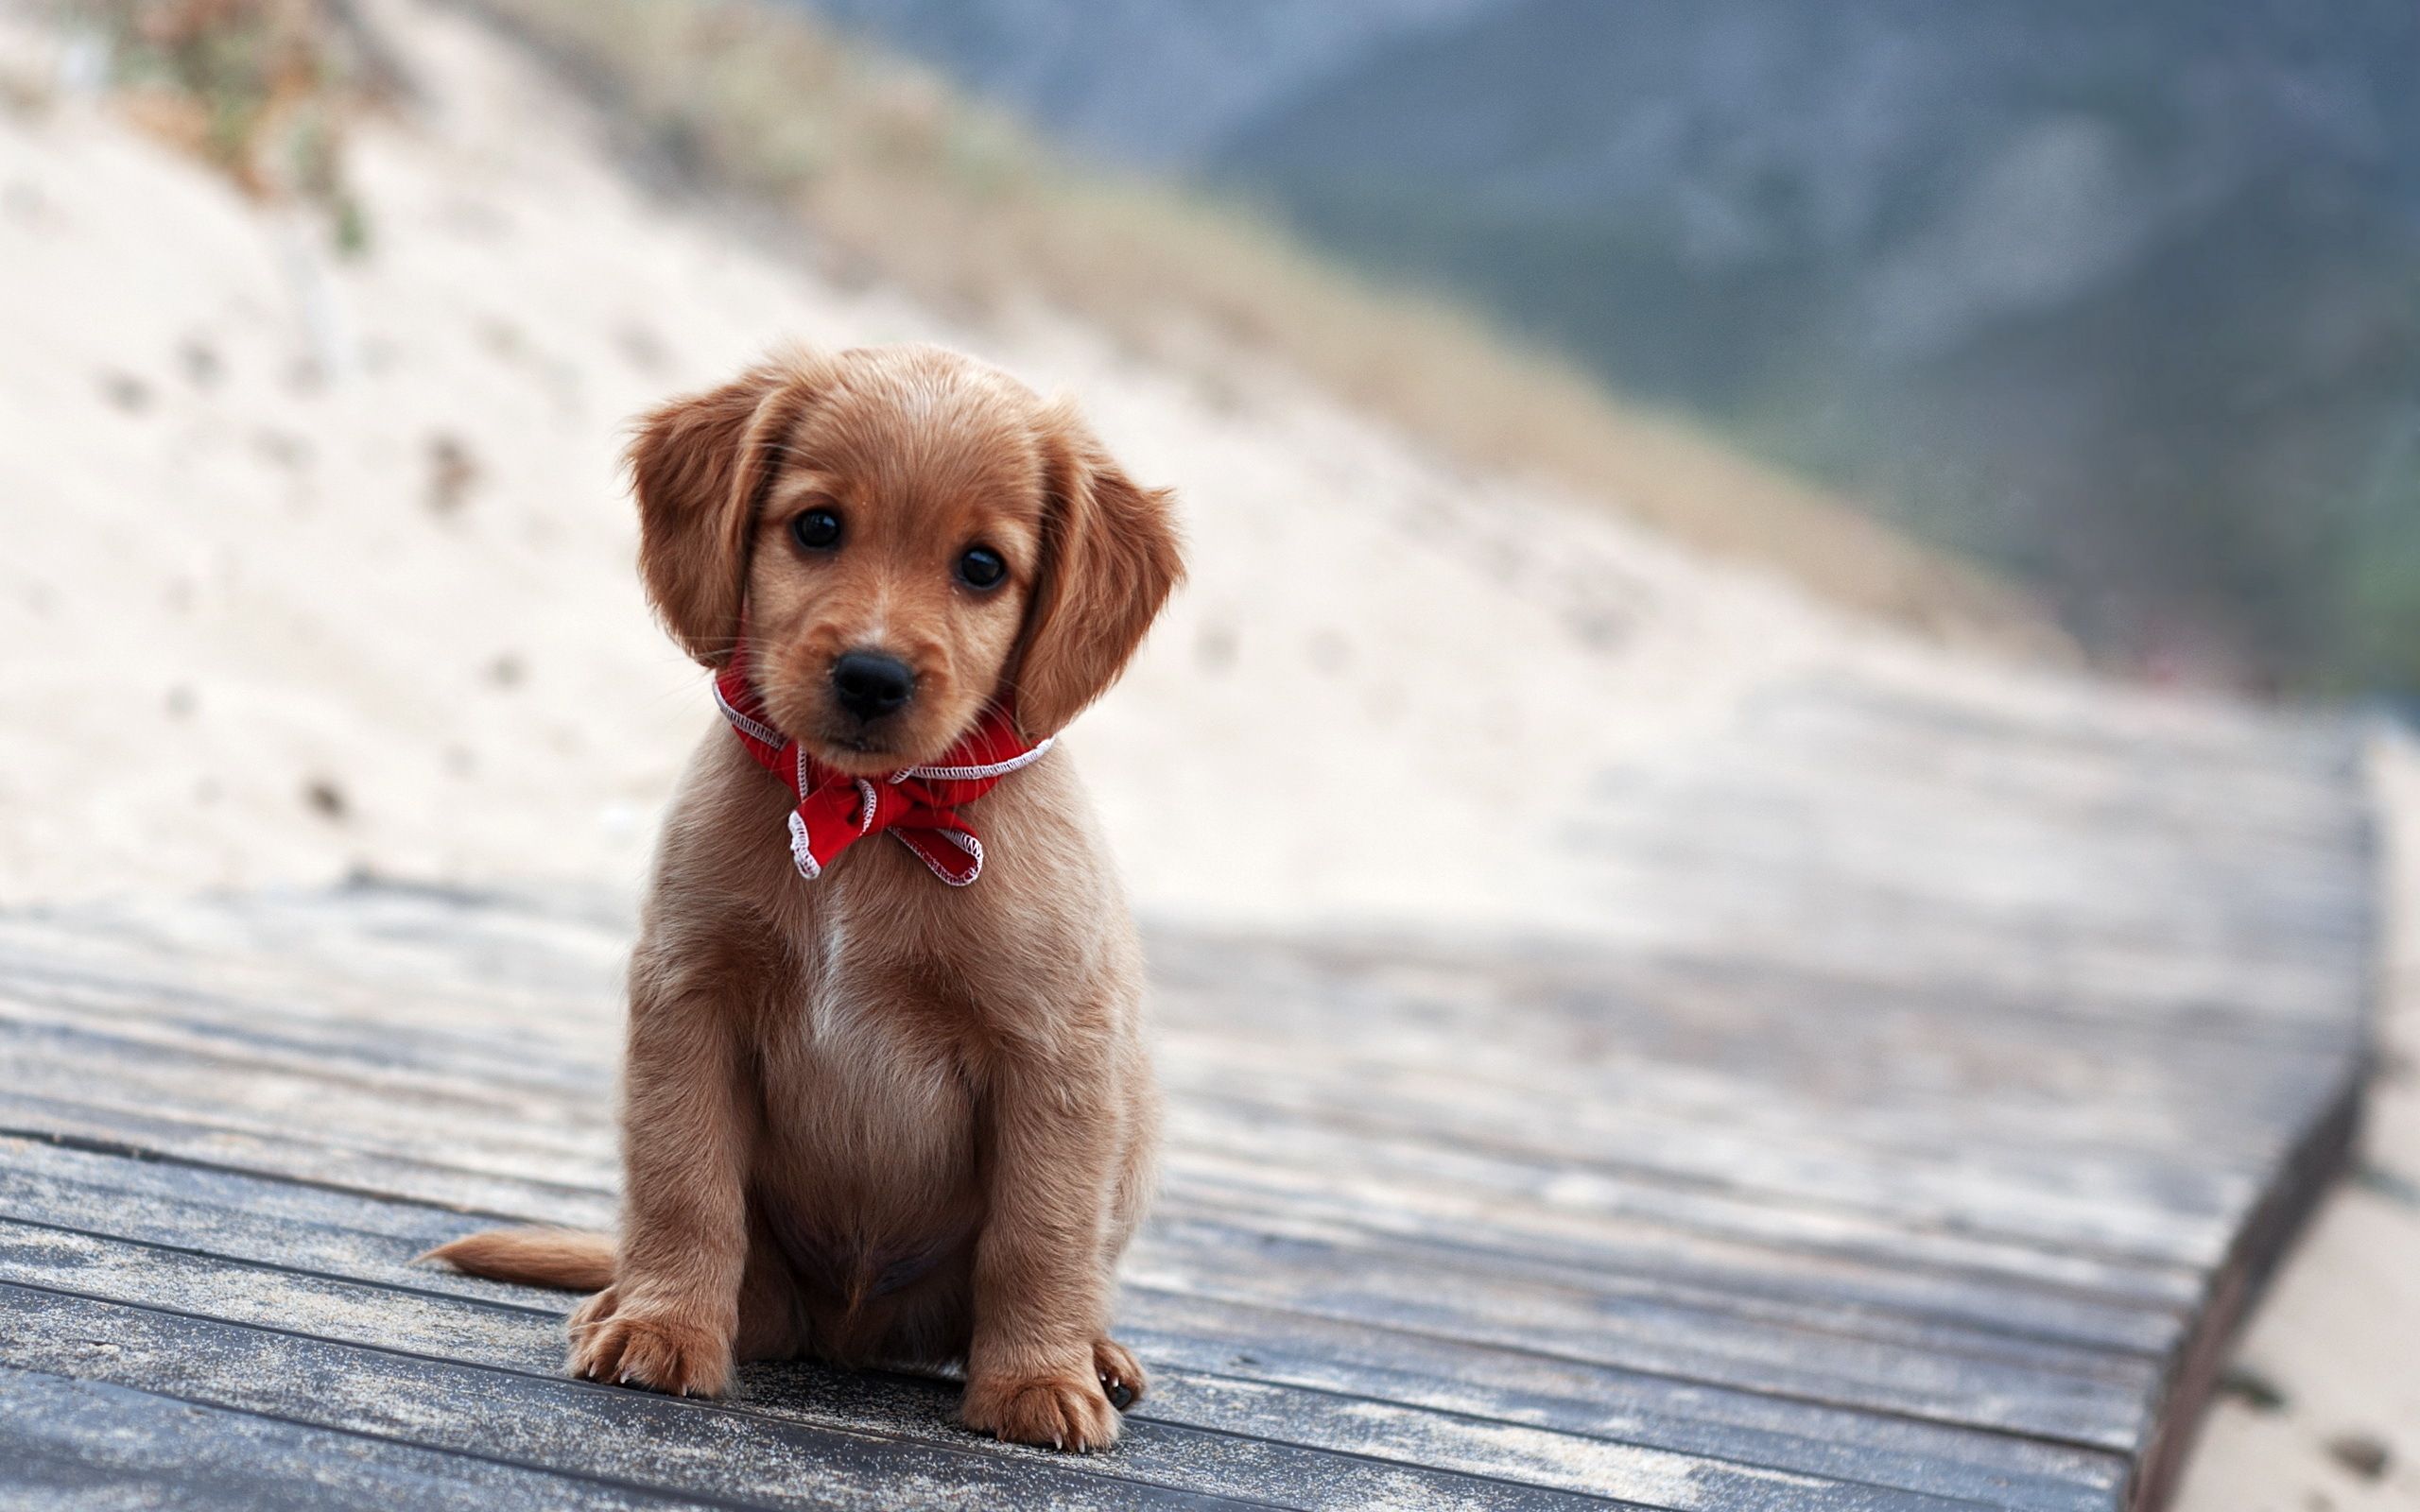 Cute Little Puppies Wallpapers - Wallpaper Cave